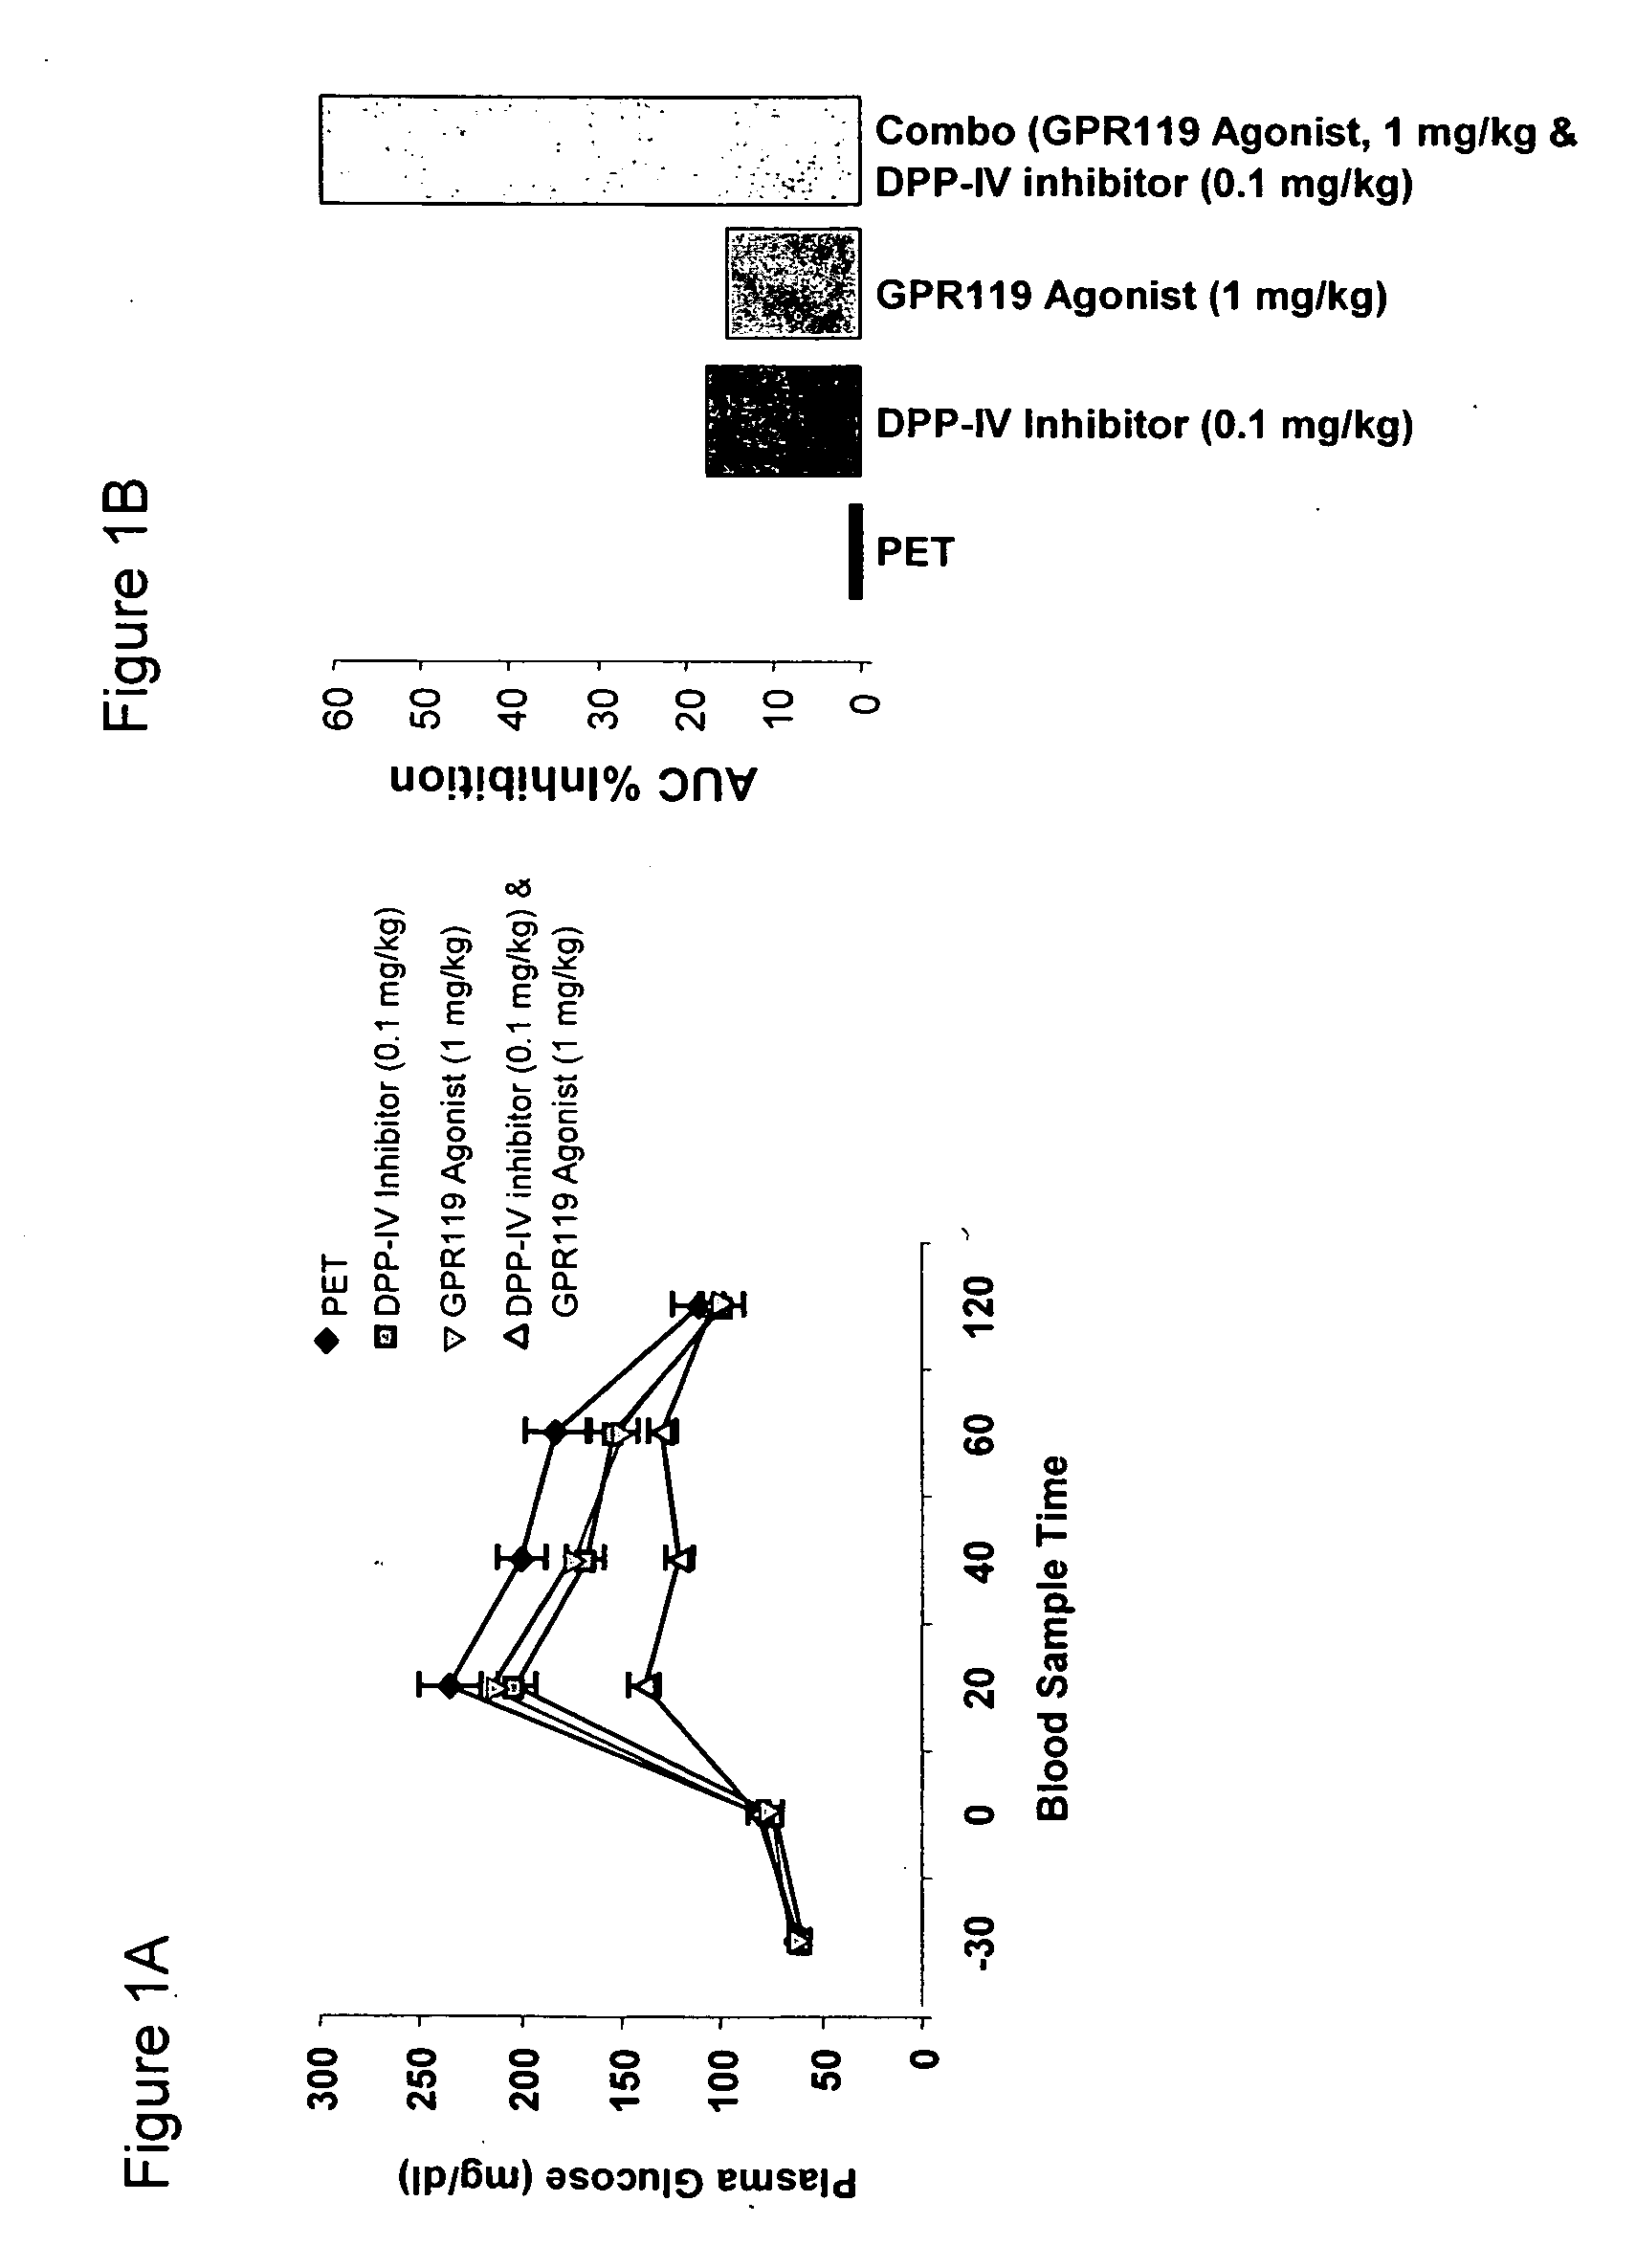 Combination therapy for the treatment of diabetes and conditions related thereto and for the treatment of conditions ameliorated by increasing a blood GLP-1 level